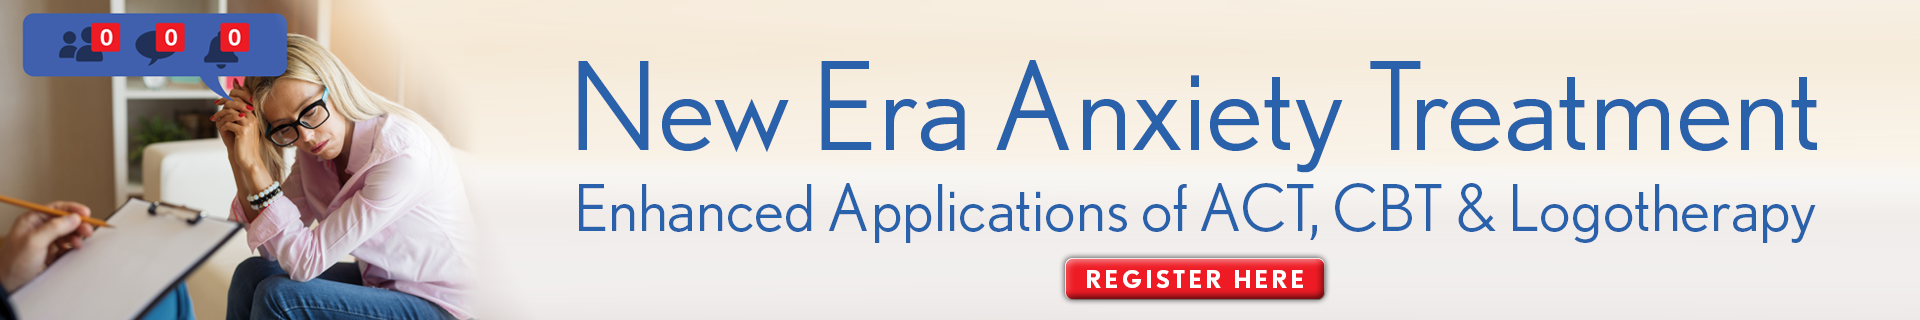 New Era Anxiety Treatment: Enhanced Applications of ACT, CBT & Logotherapy